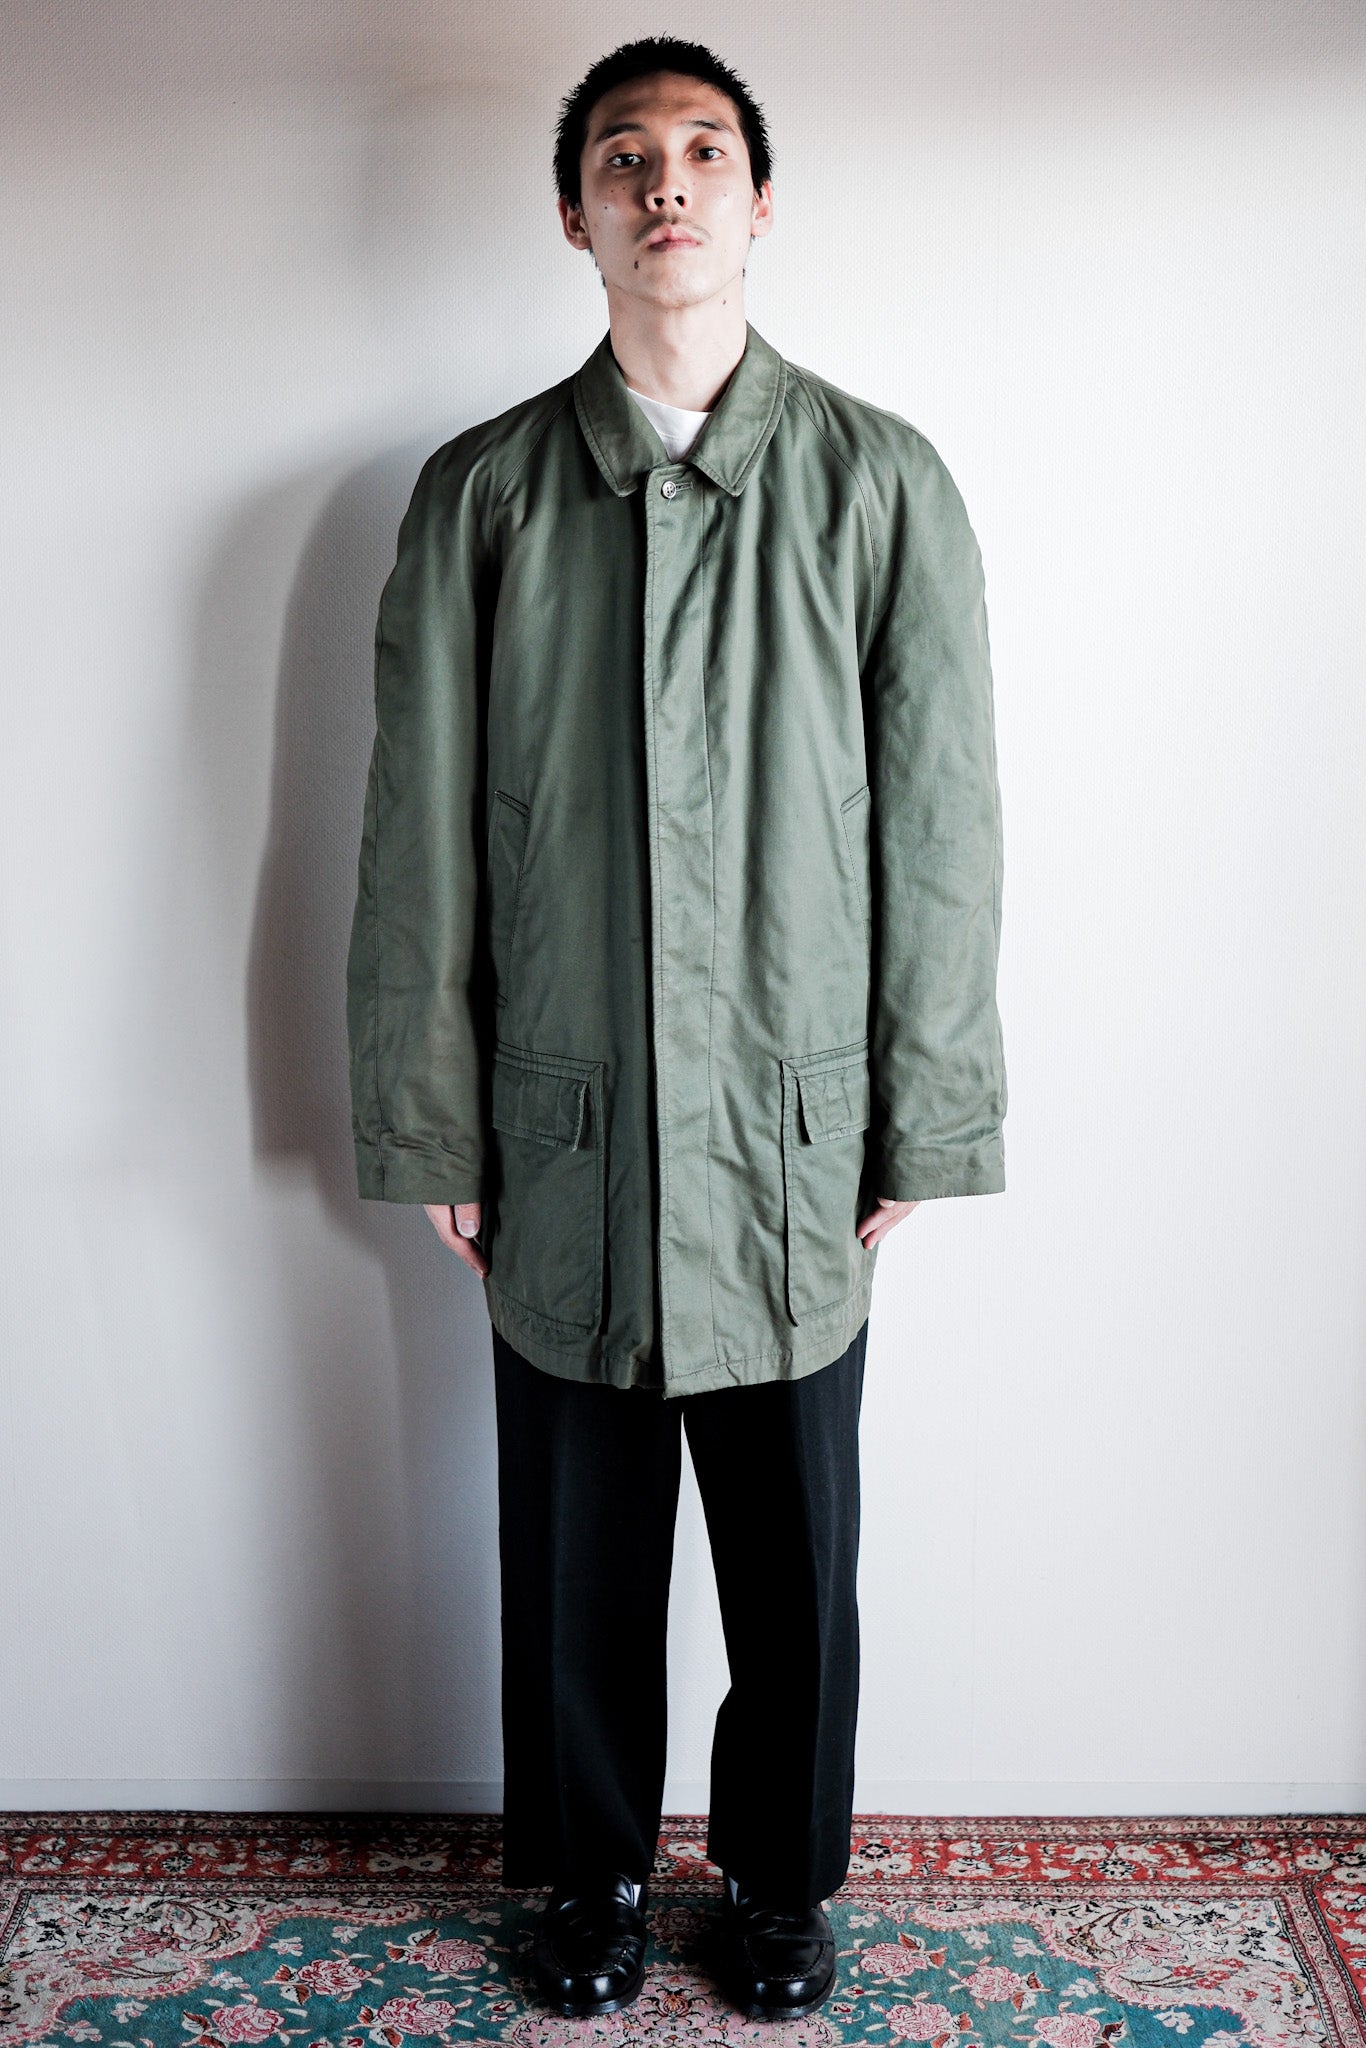 [~ 60's] Vintage Grenfell Outdoor Half Coat "Mountain Tag" "JC.Cordings & Co.LTD Besides Note"